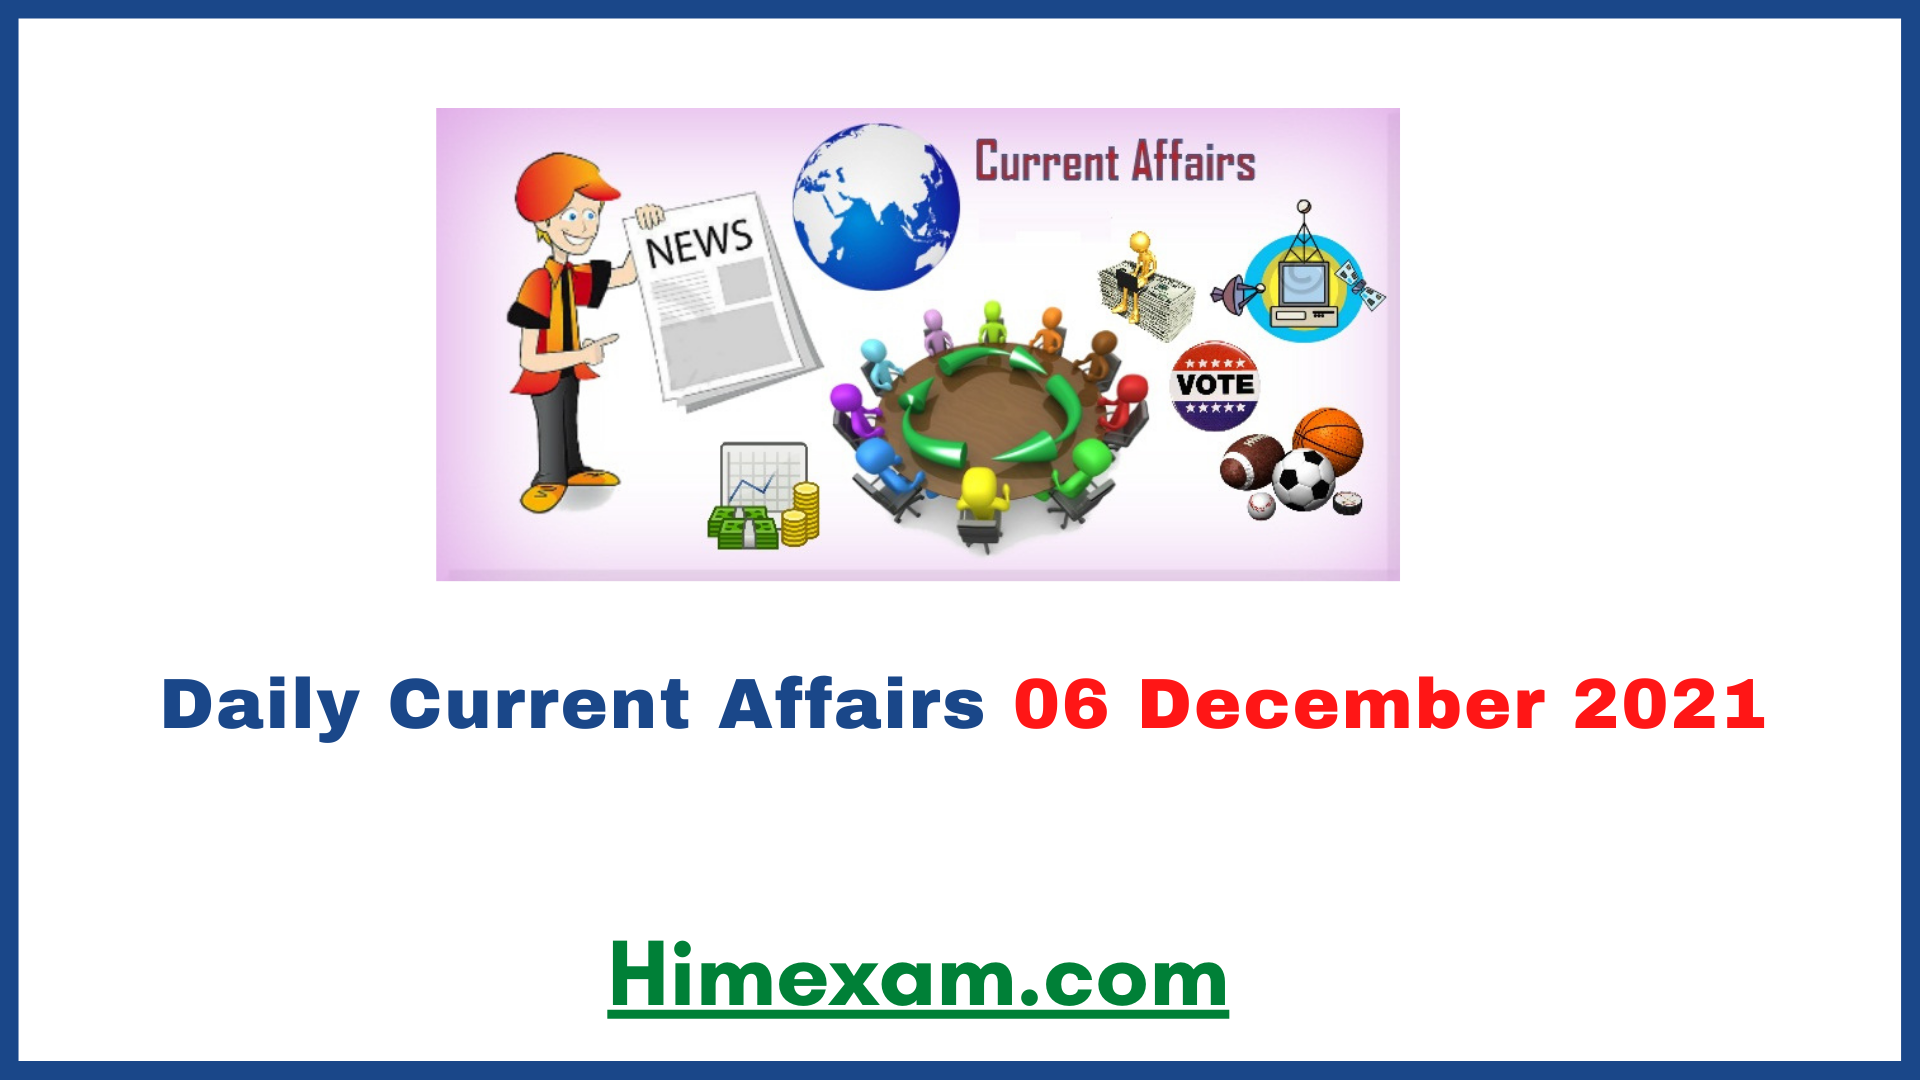 Daily Current Affairs 06 December 2021